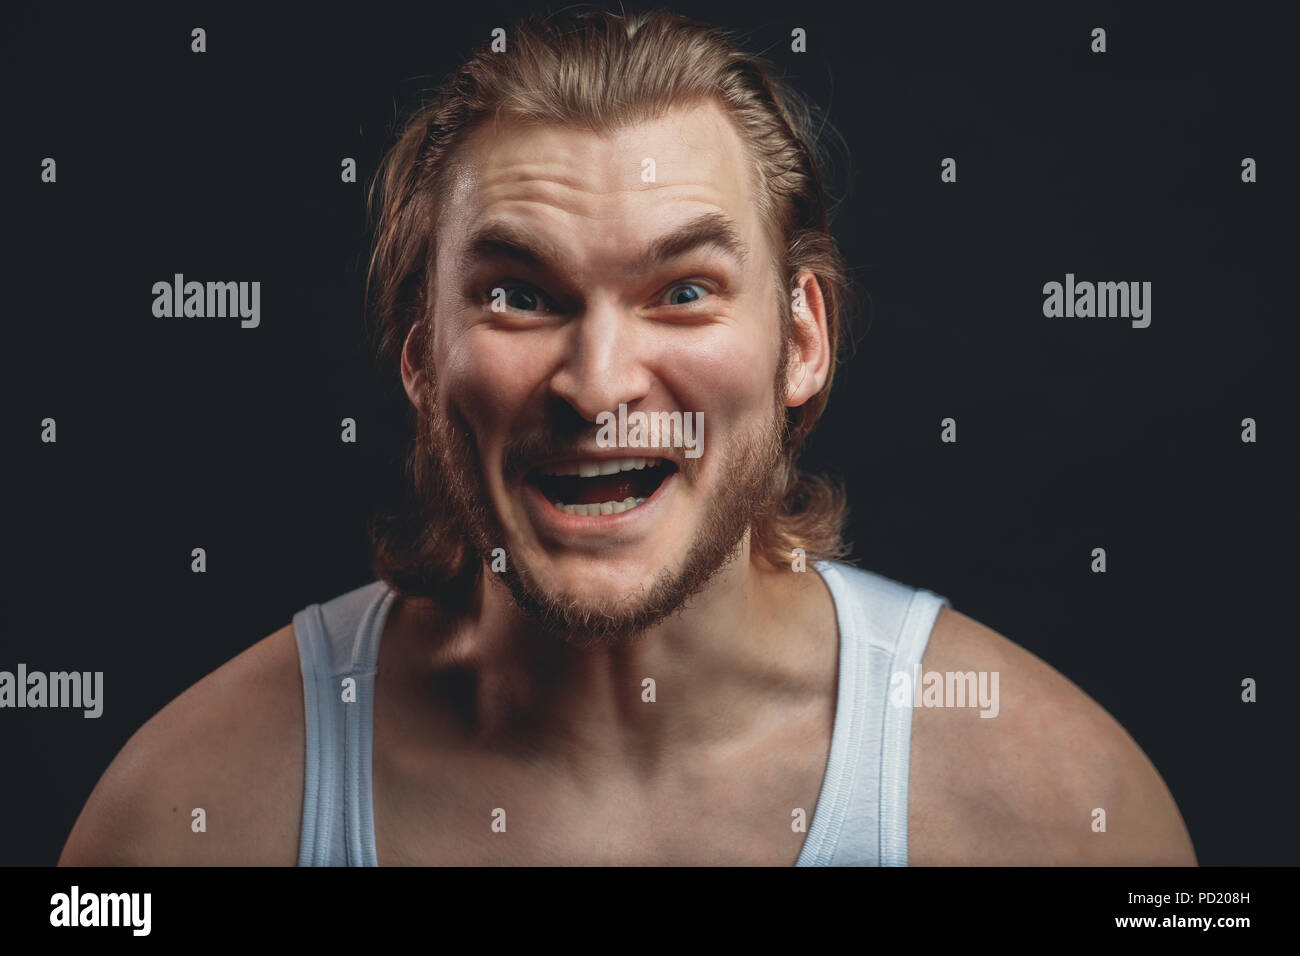 closeup portrait of strong guy with stupid face isolated black background. funny look. madness concept Stock Photo